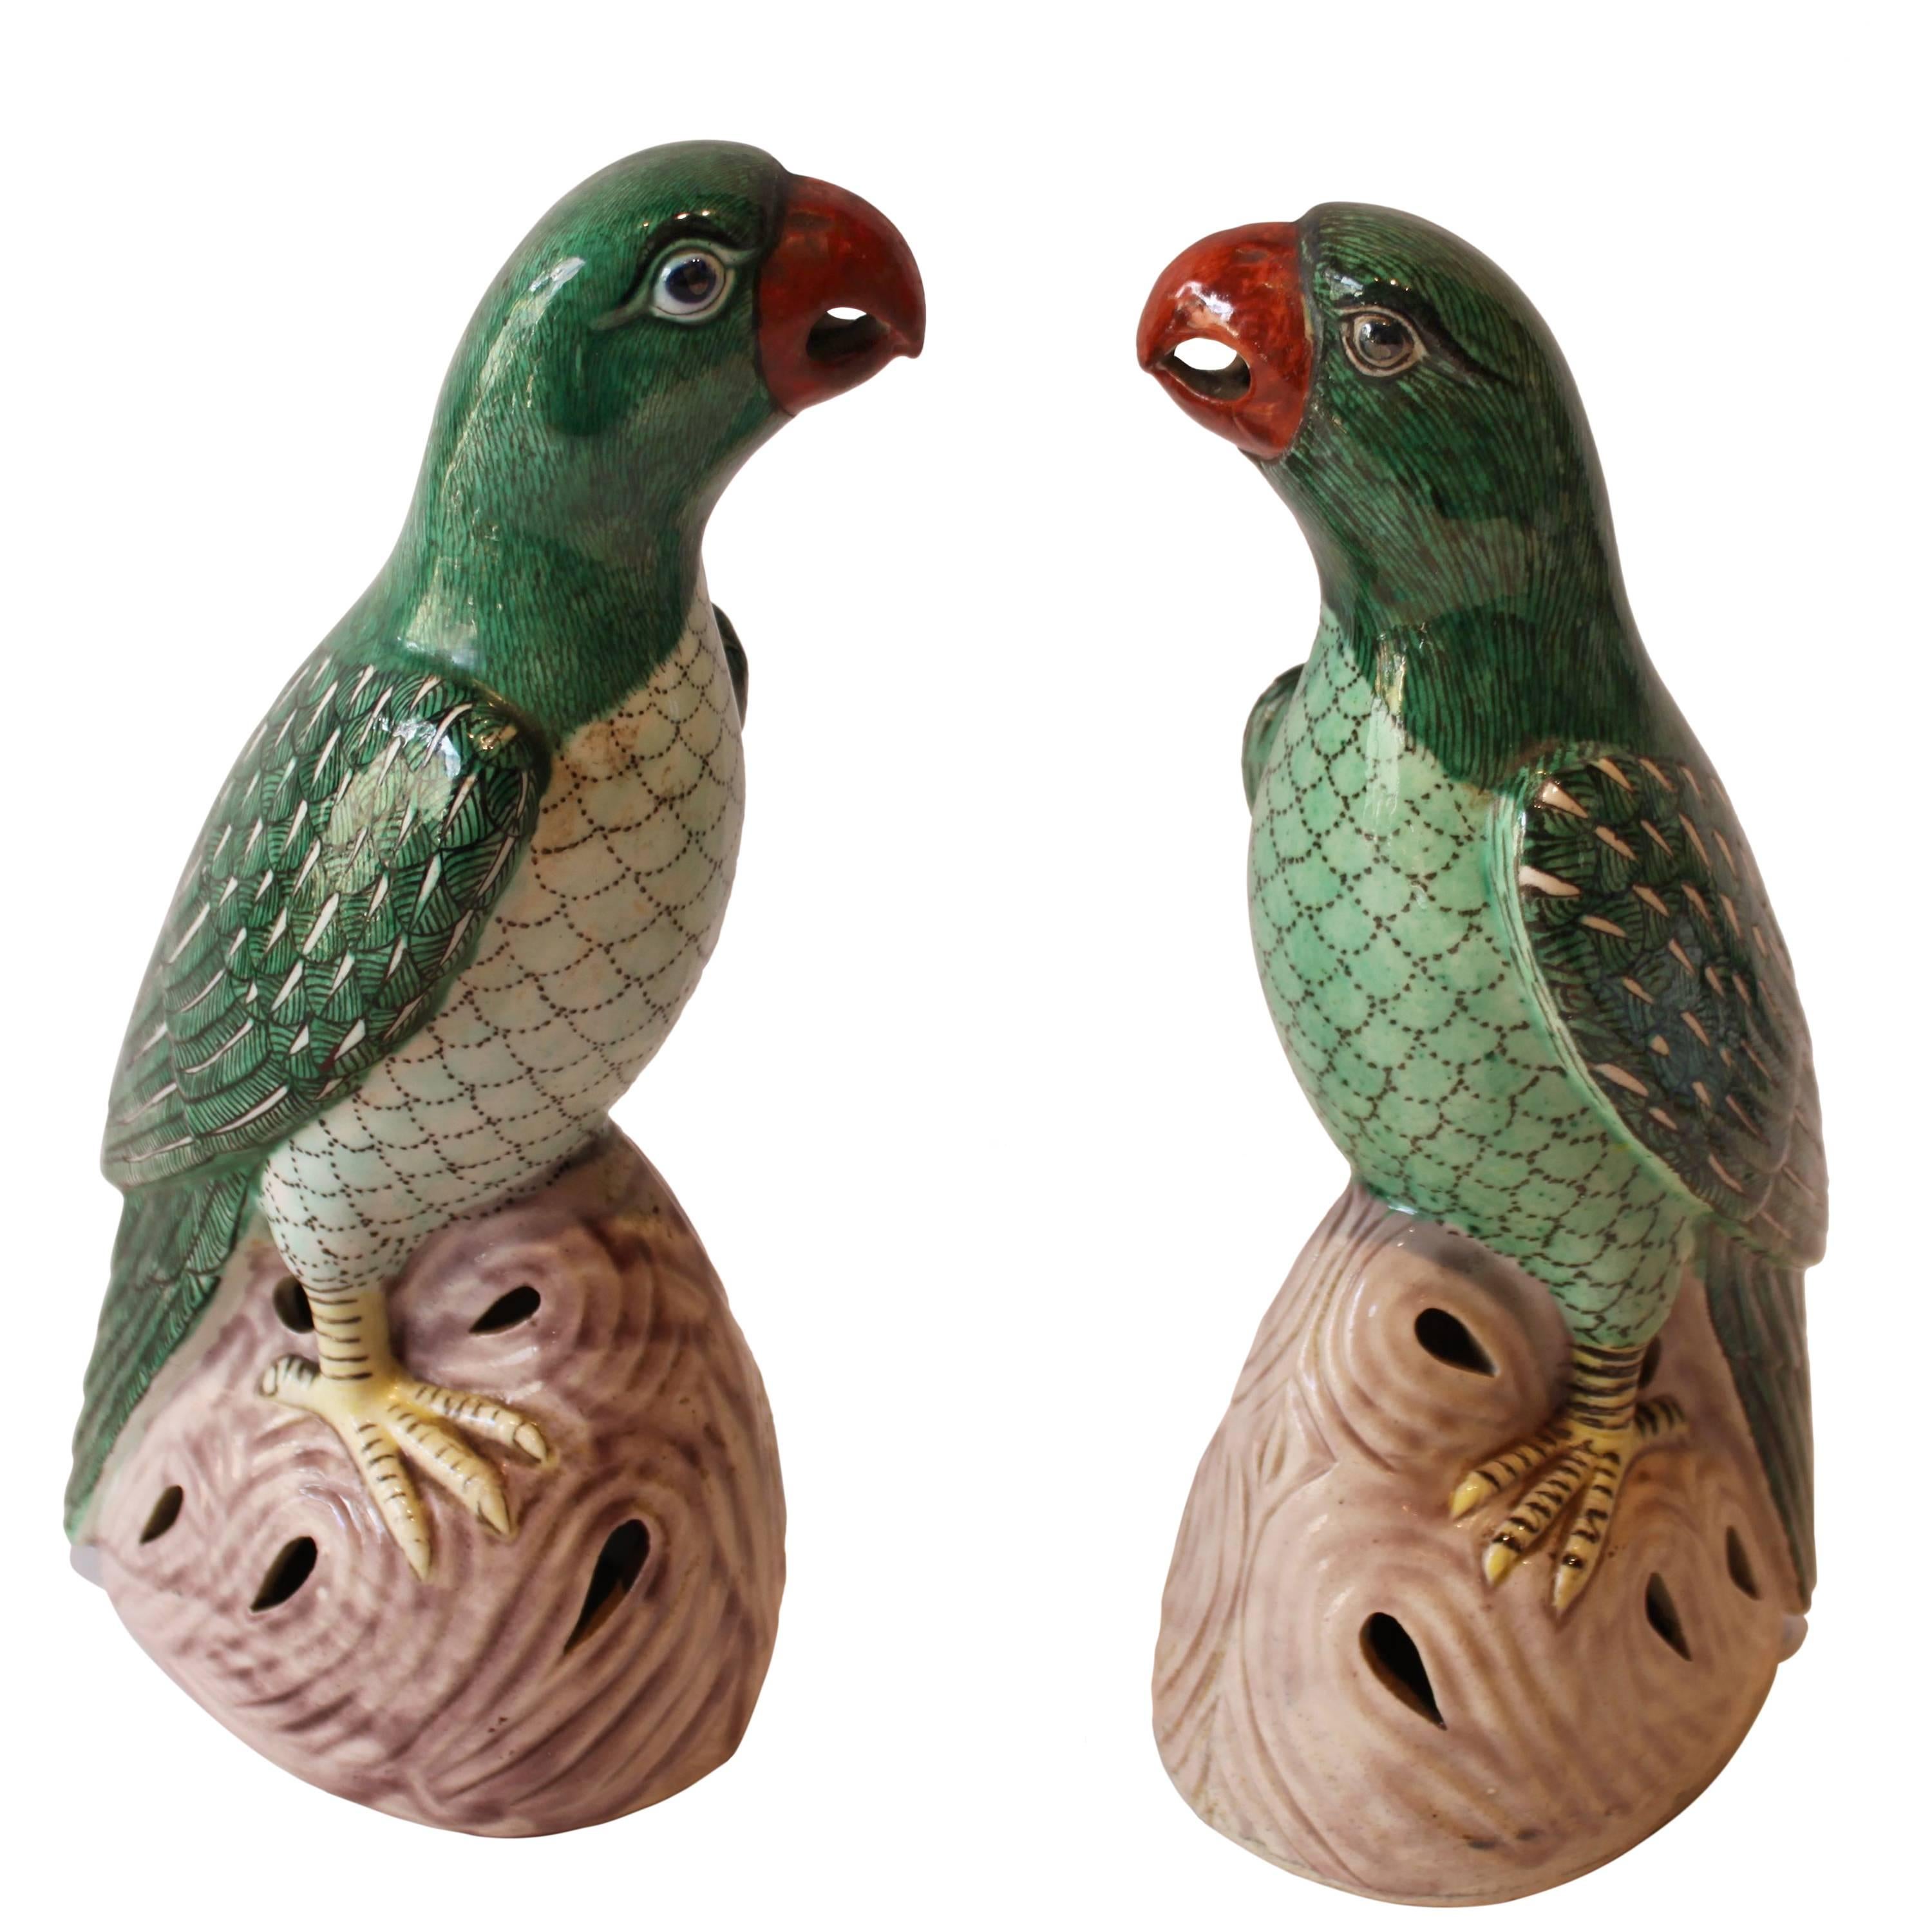 Pair of Chinese Export Famille Verte Green Hand-Painted Ceramic Parrots